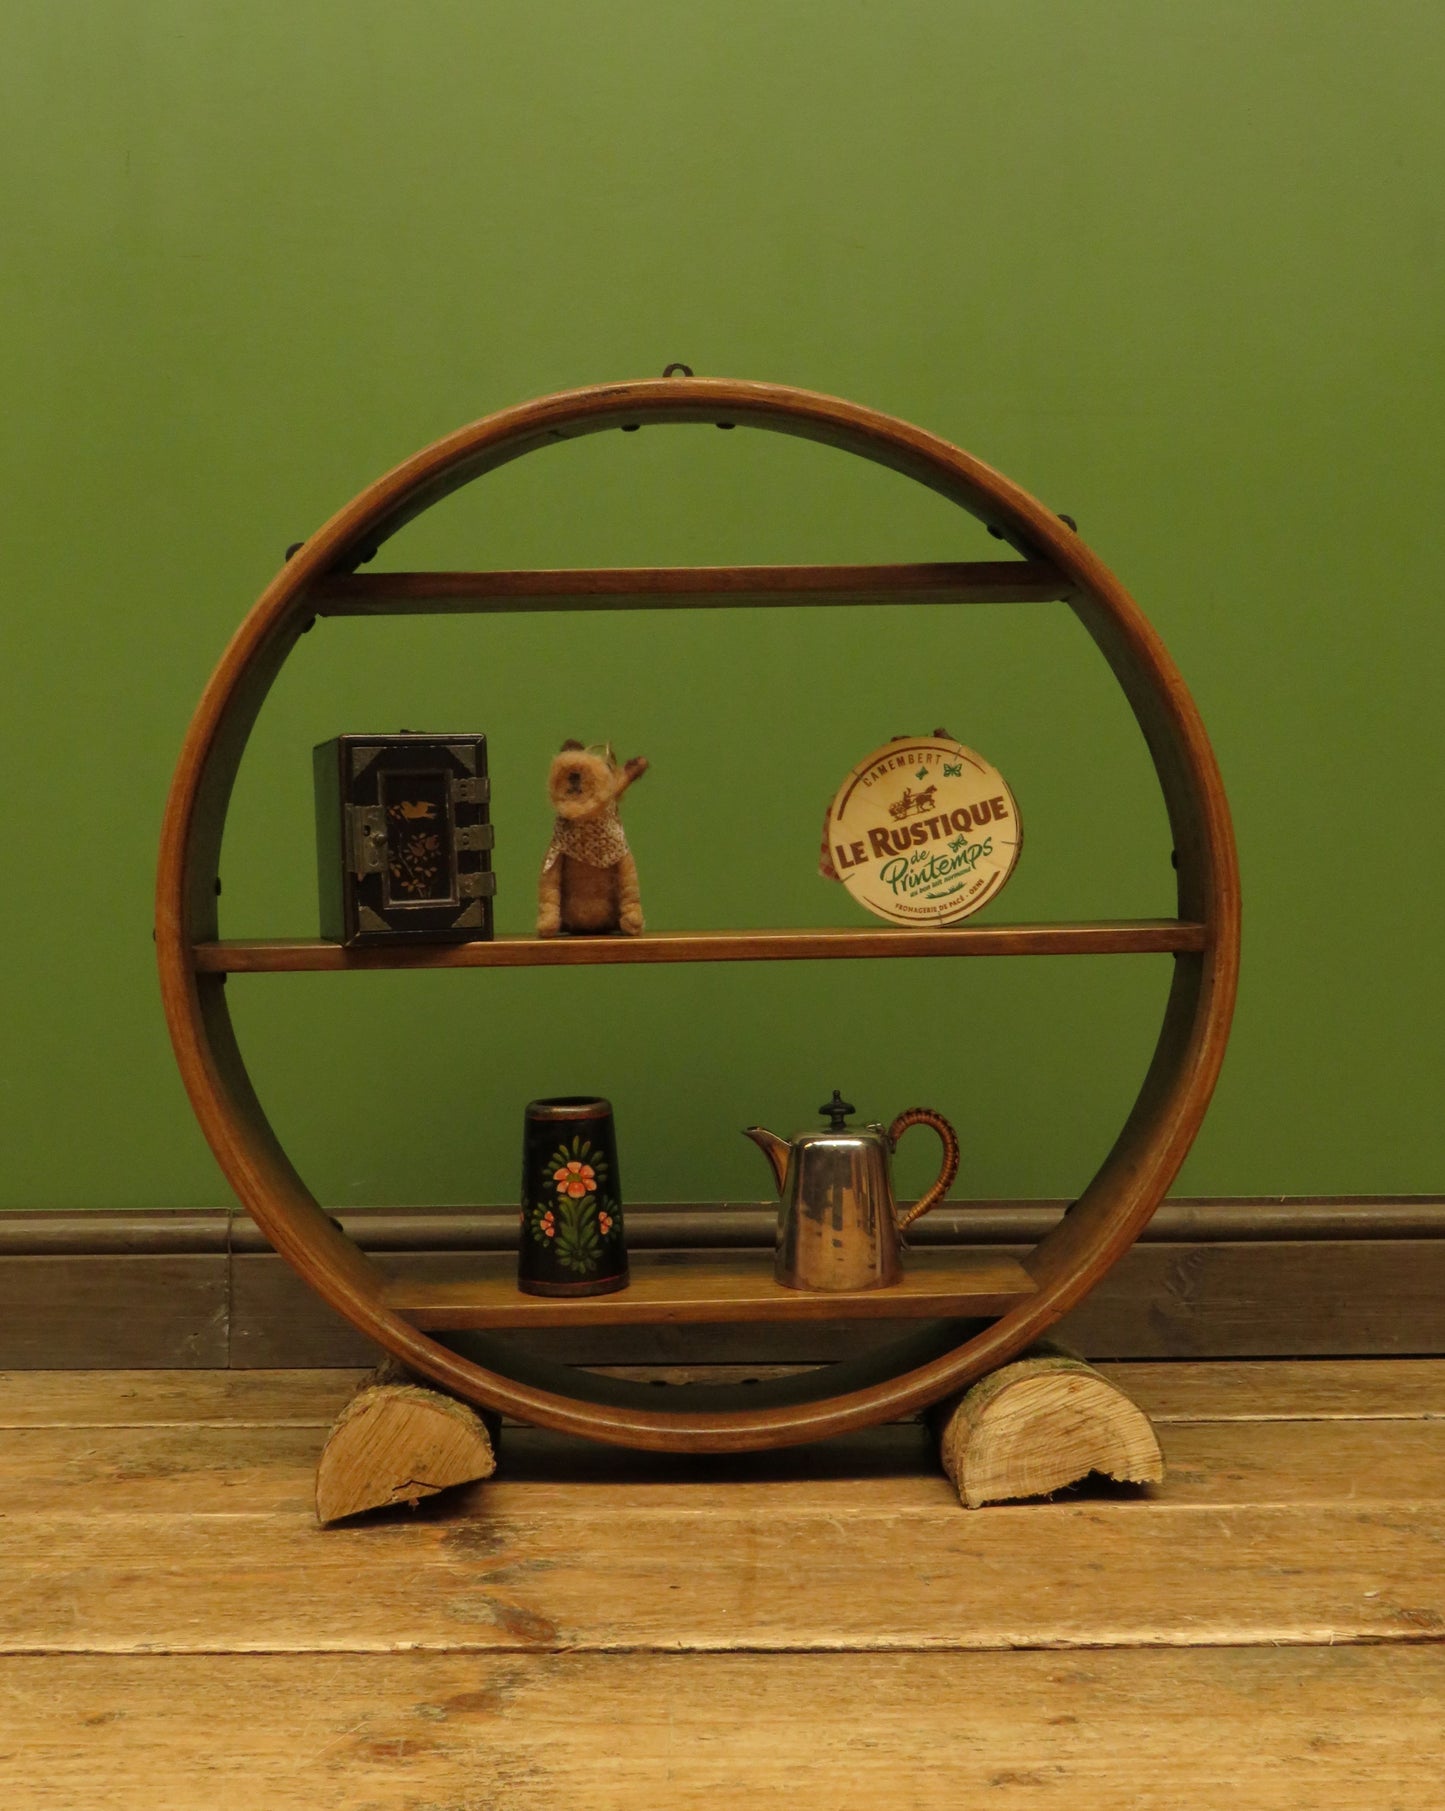 Vintage upcycled Shelf Display Unit made from a wooden drum